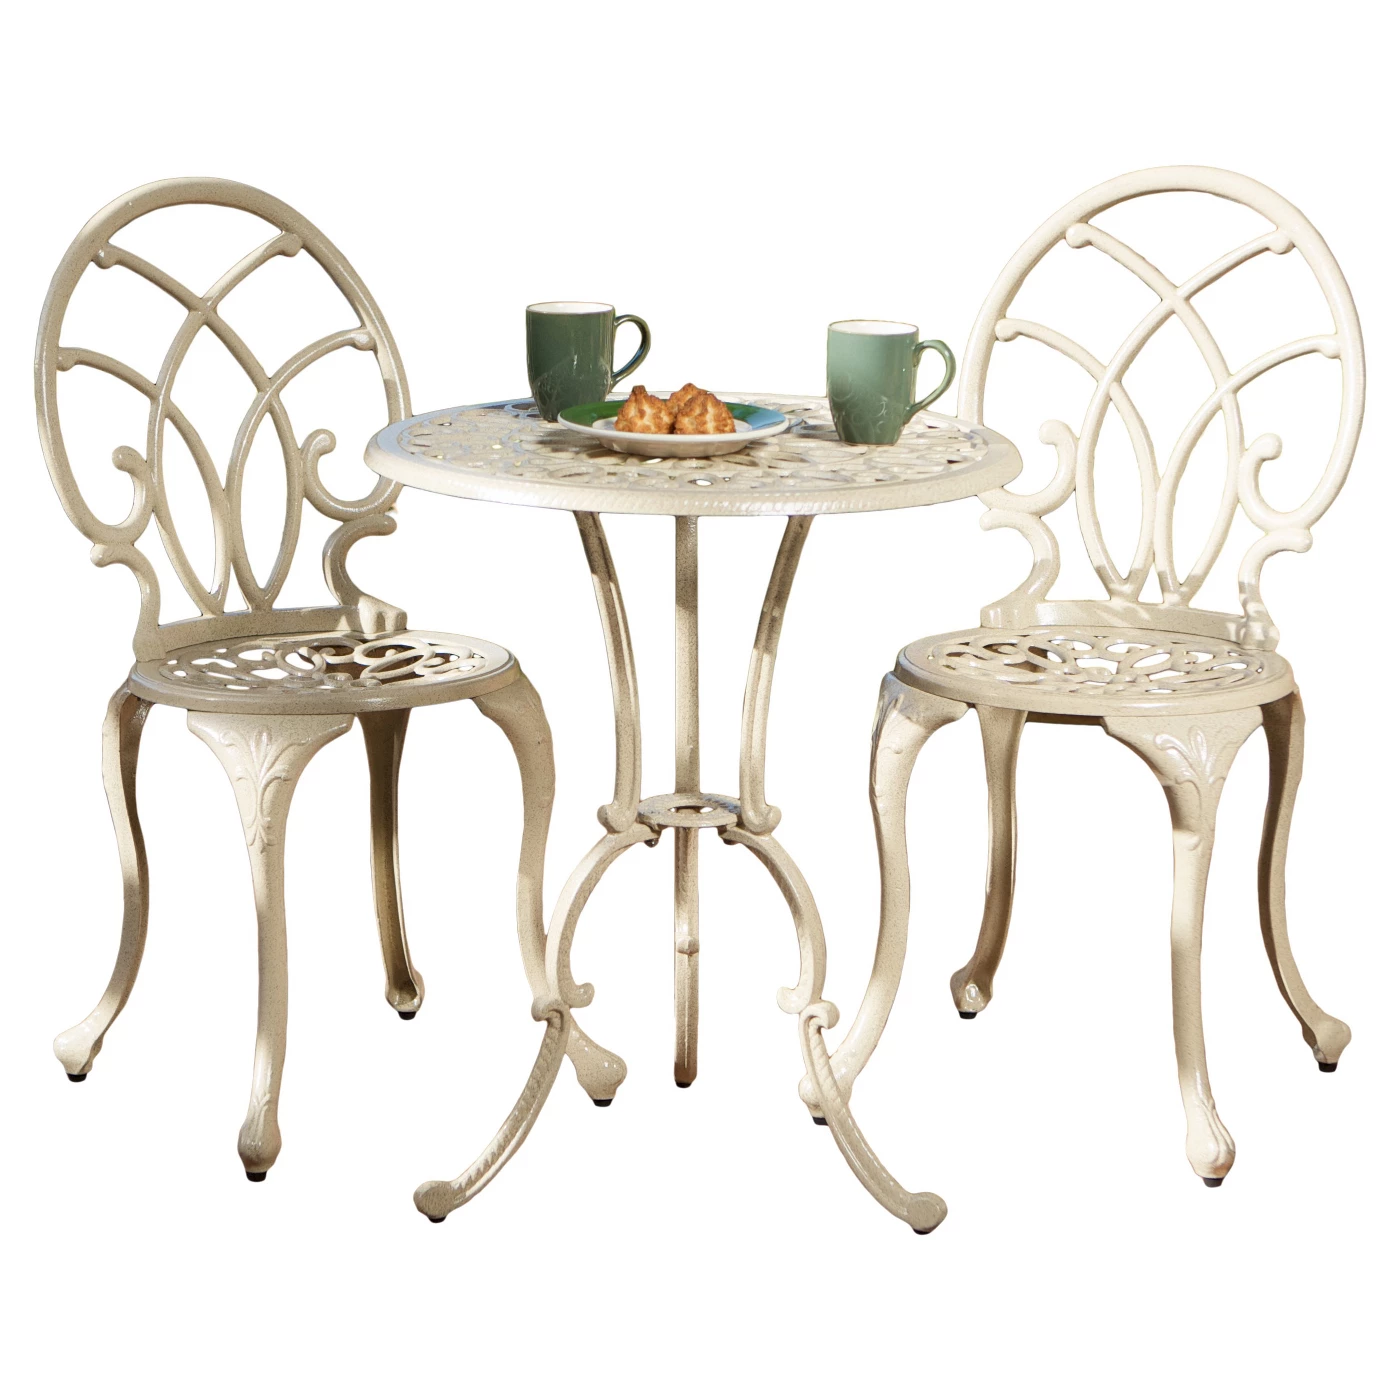 Anacapa 3pc Cast Aluminum Patio Bistro Set - Sand - Christopher Knight Home - image 1 of 4